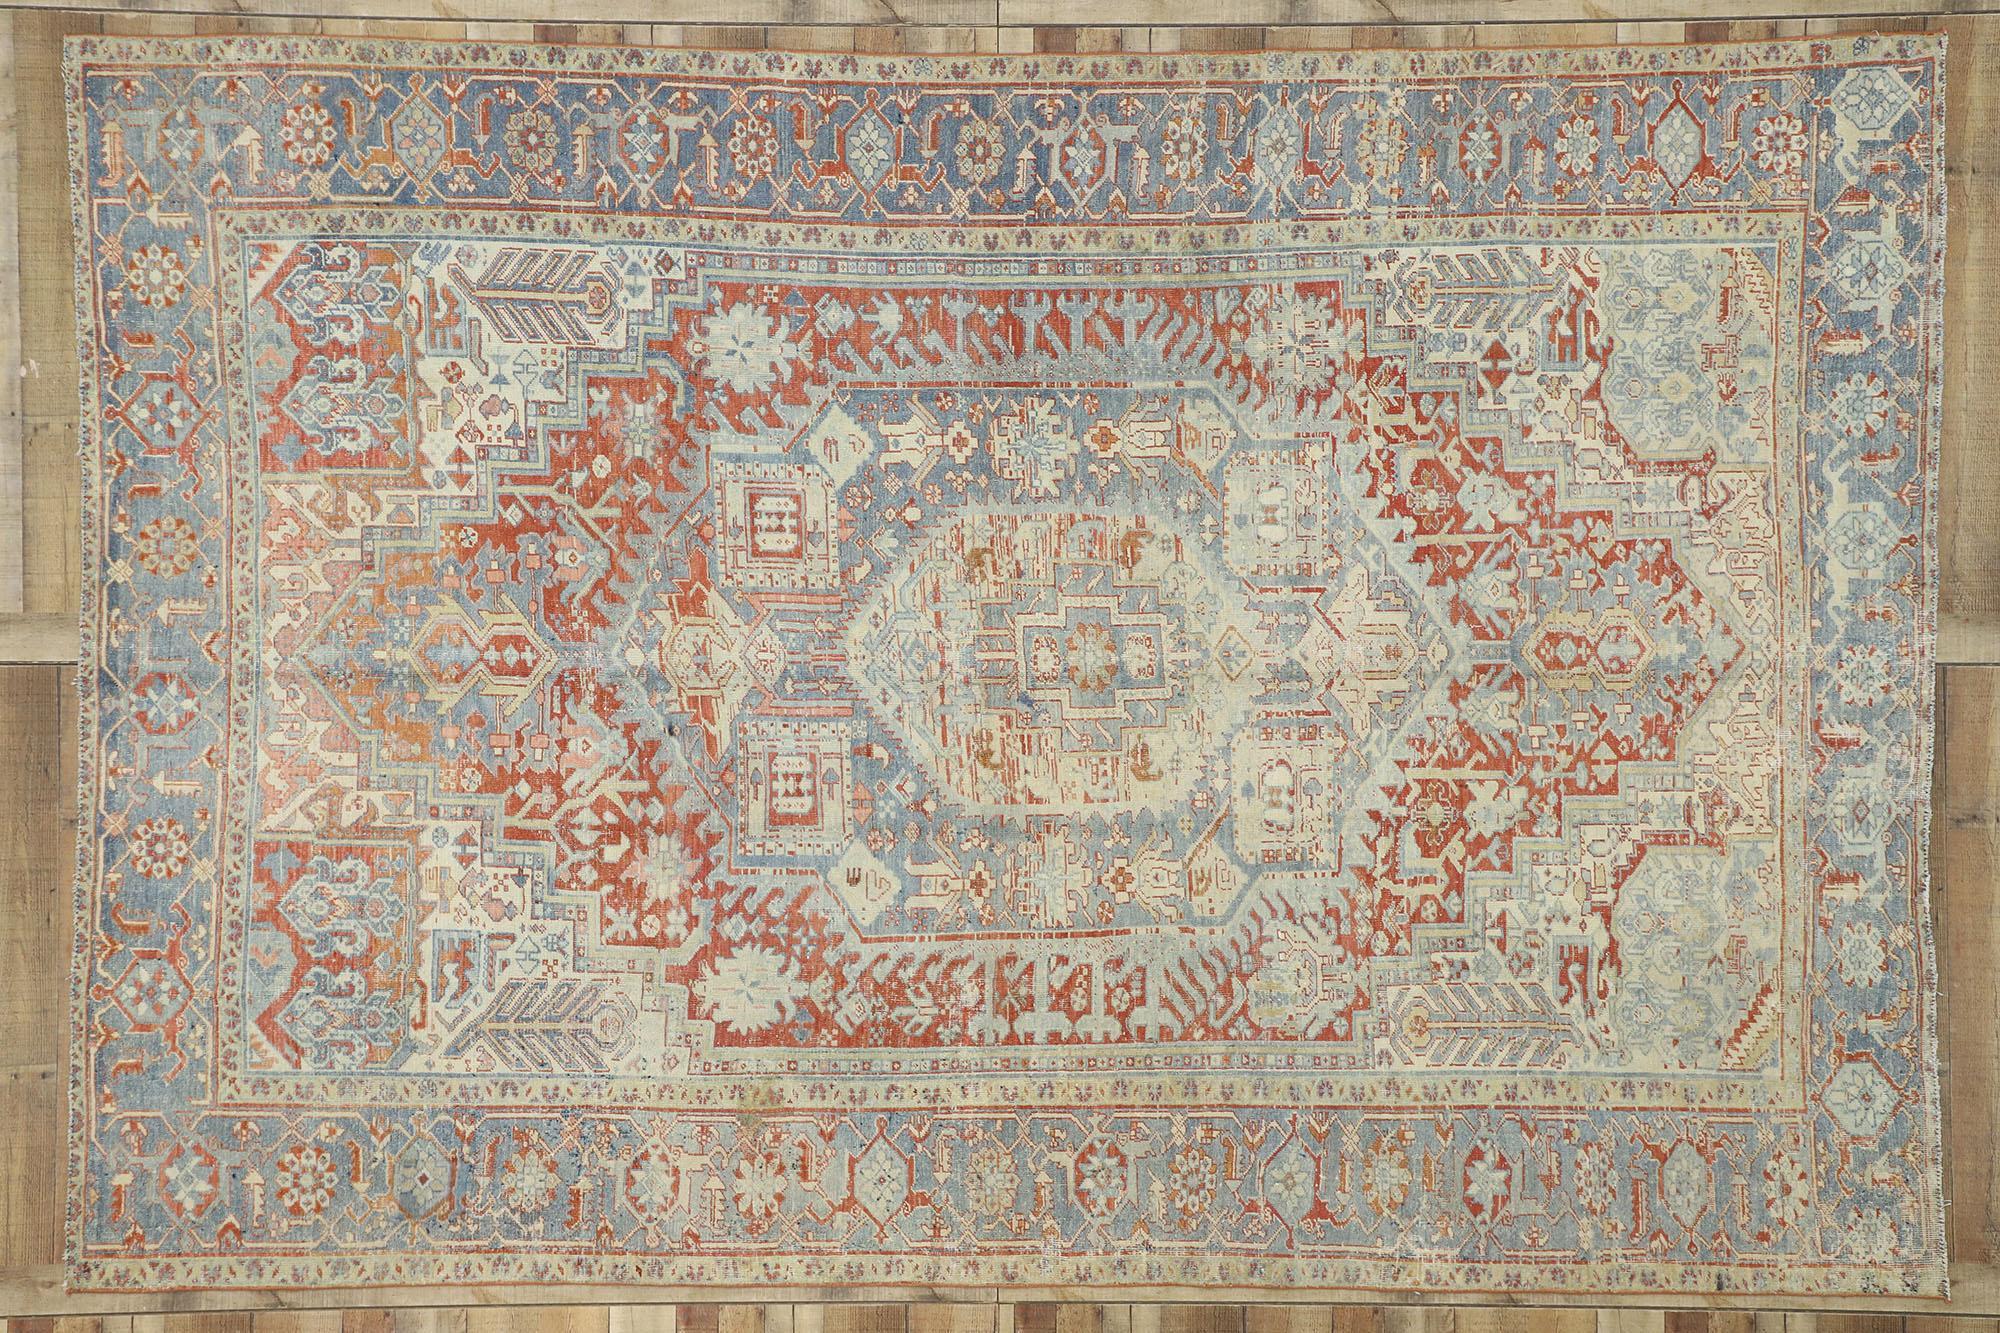 52636 distressed antique Persian Heriz Design rug with Rustic English Tudor style. With timeless appeal, refined colors, and architectural design elements, this hand knotted wool distressed antique Persian Heriz design rug can beautifully blend